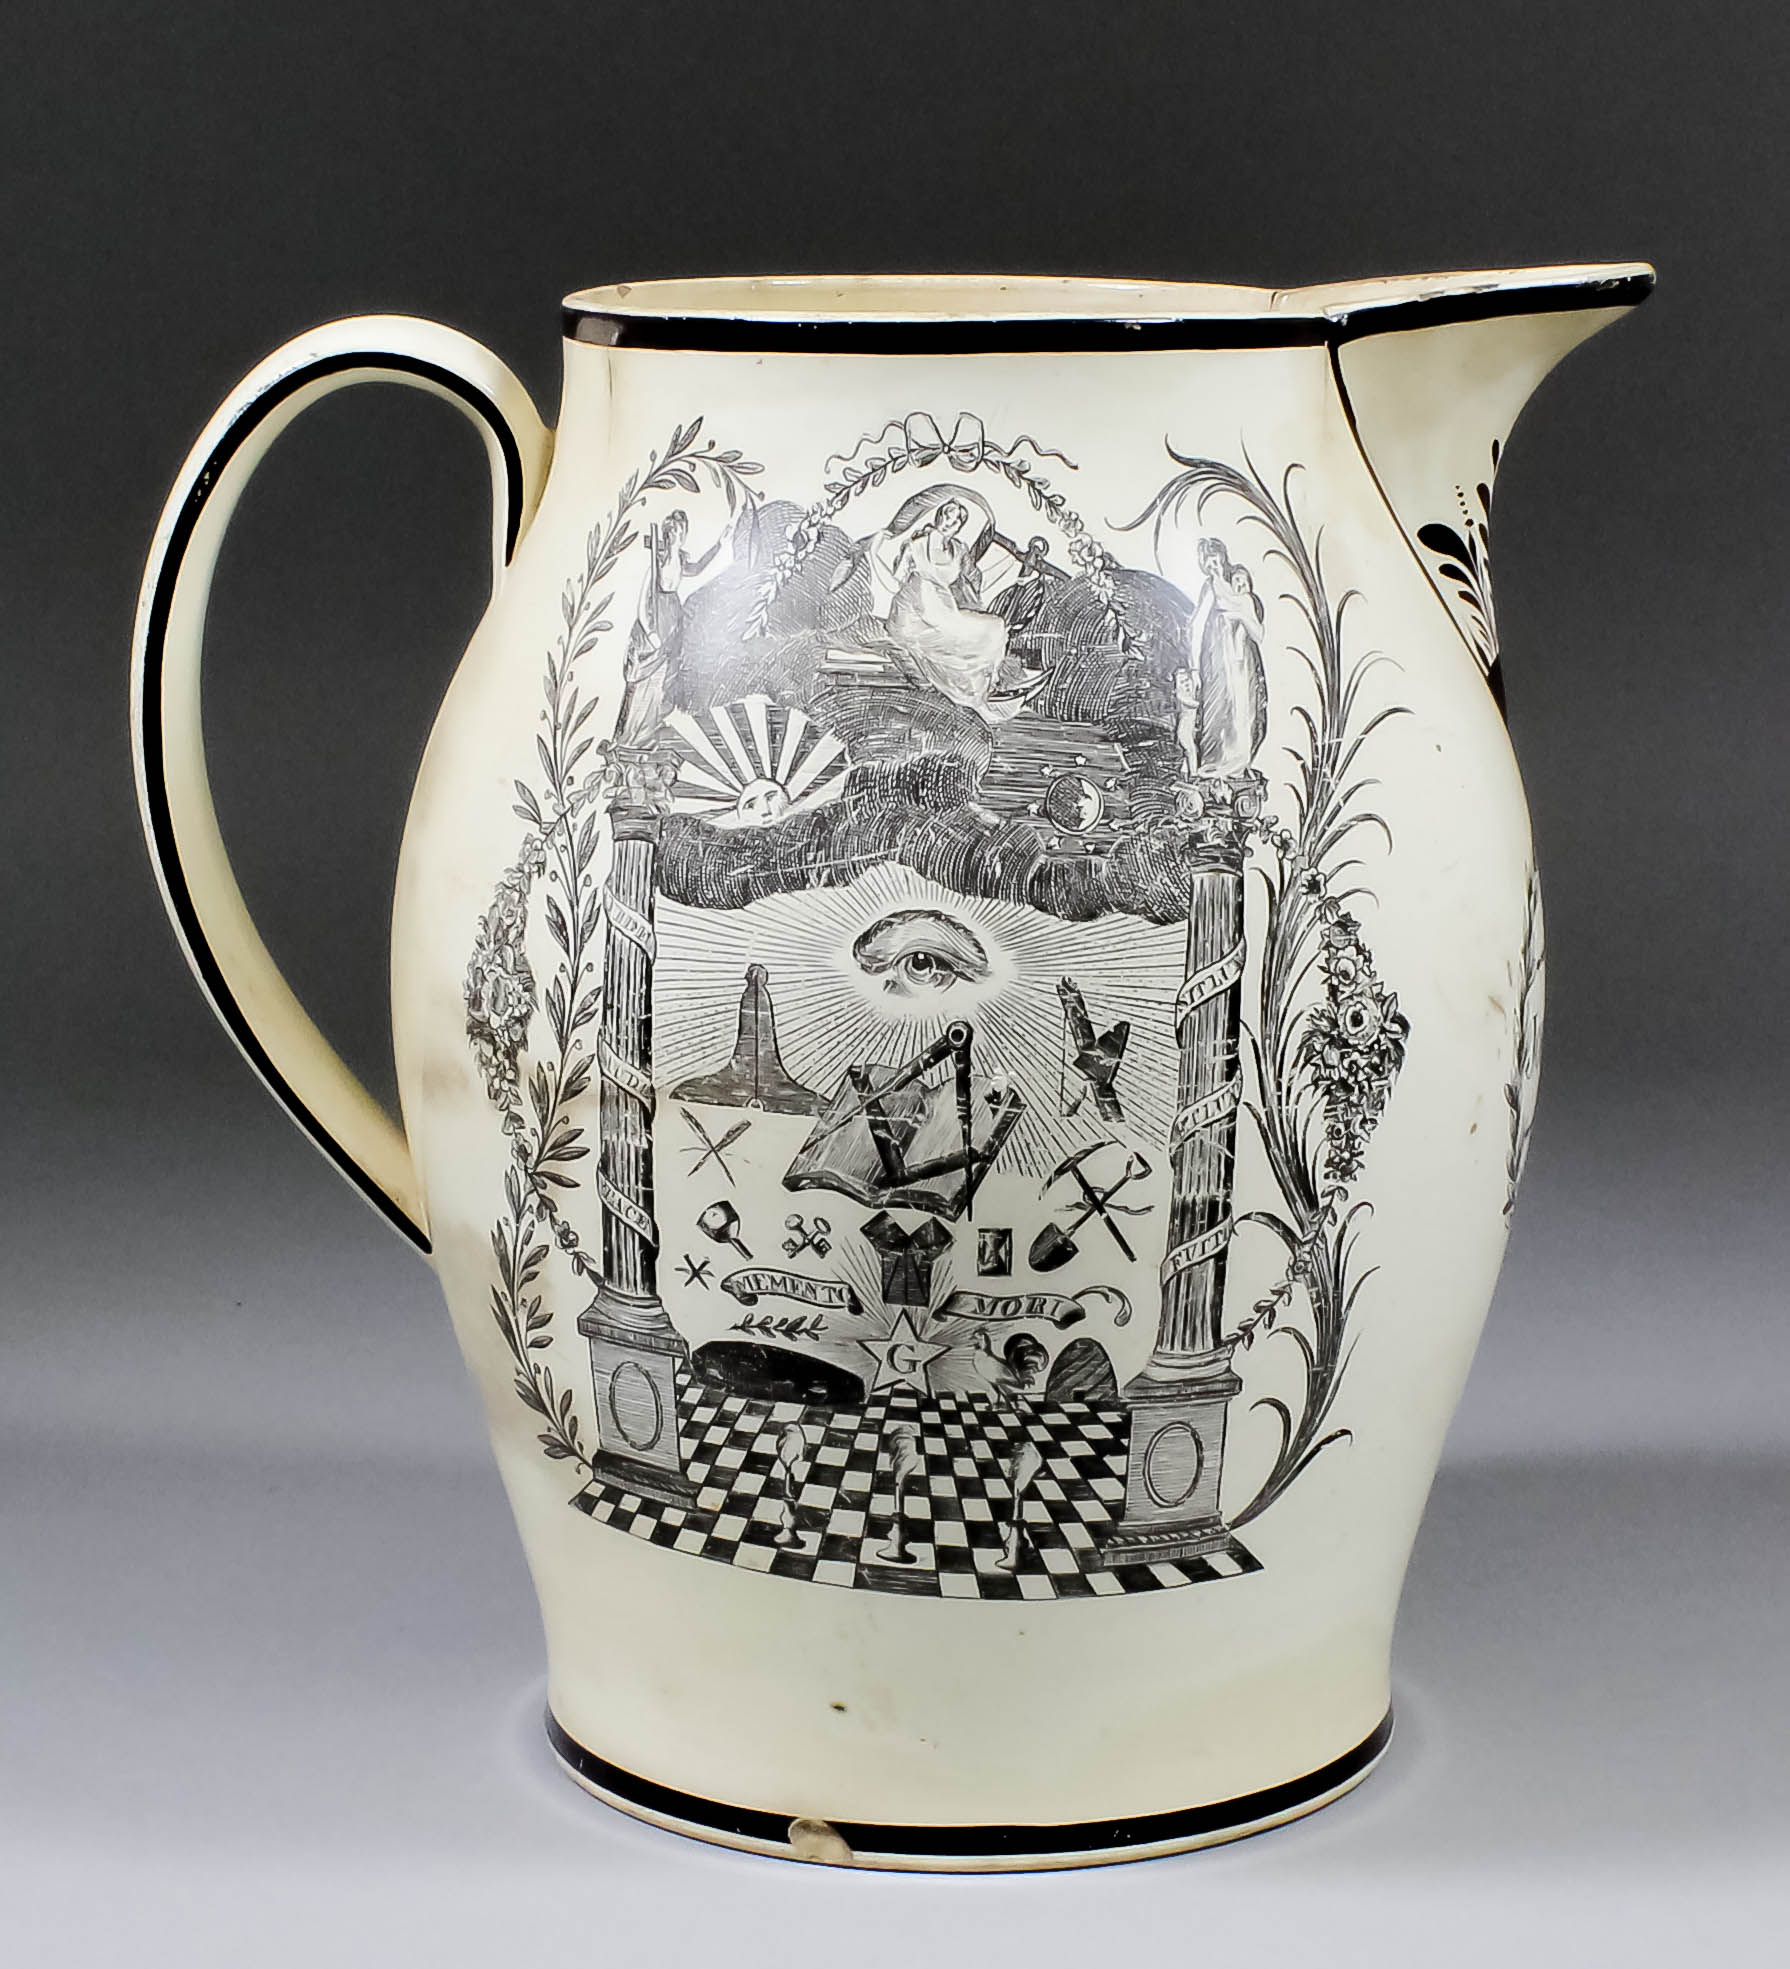 A late 18th Century English creamware jug, transfer printed in black with "The Farmers Arms",